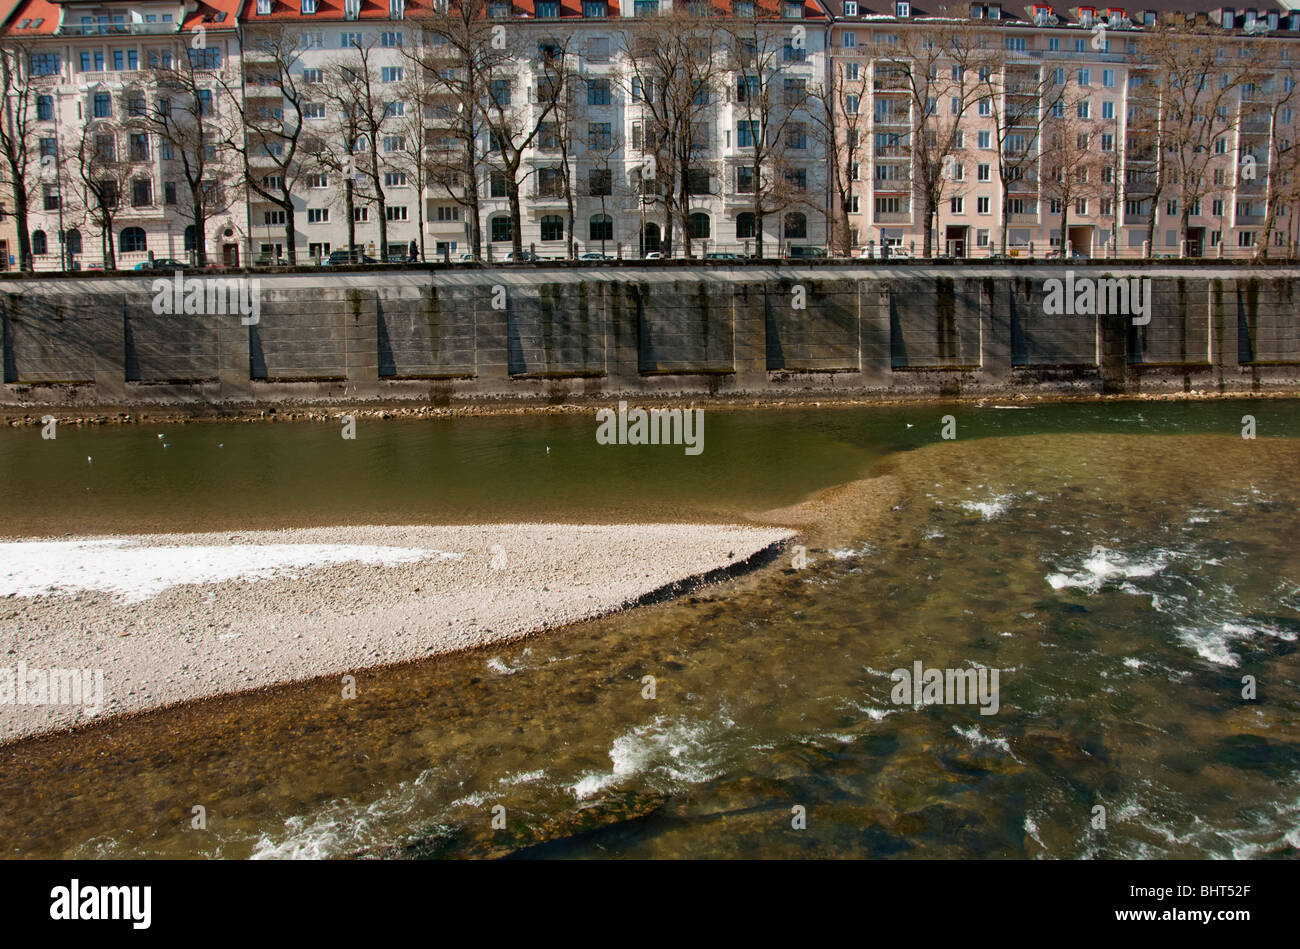 Apartment blocks over the river Isar in Munich, Germany Stock Photo